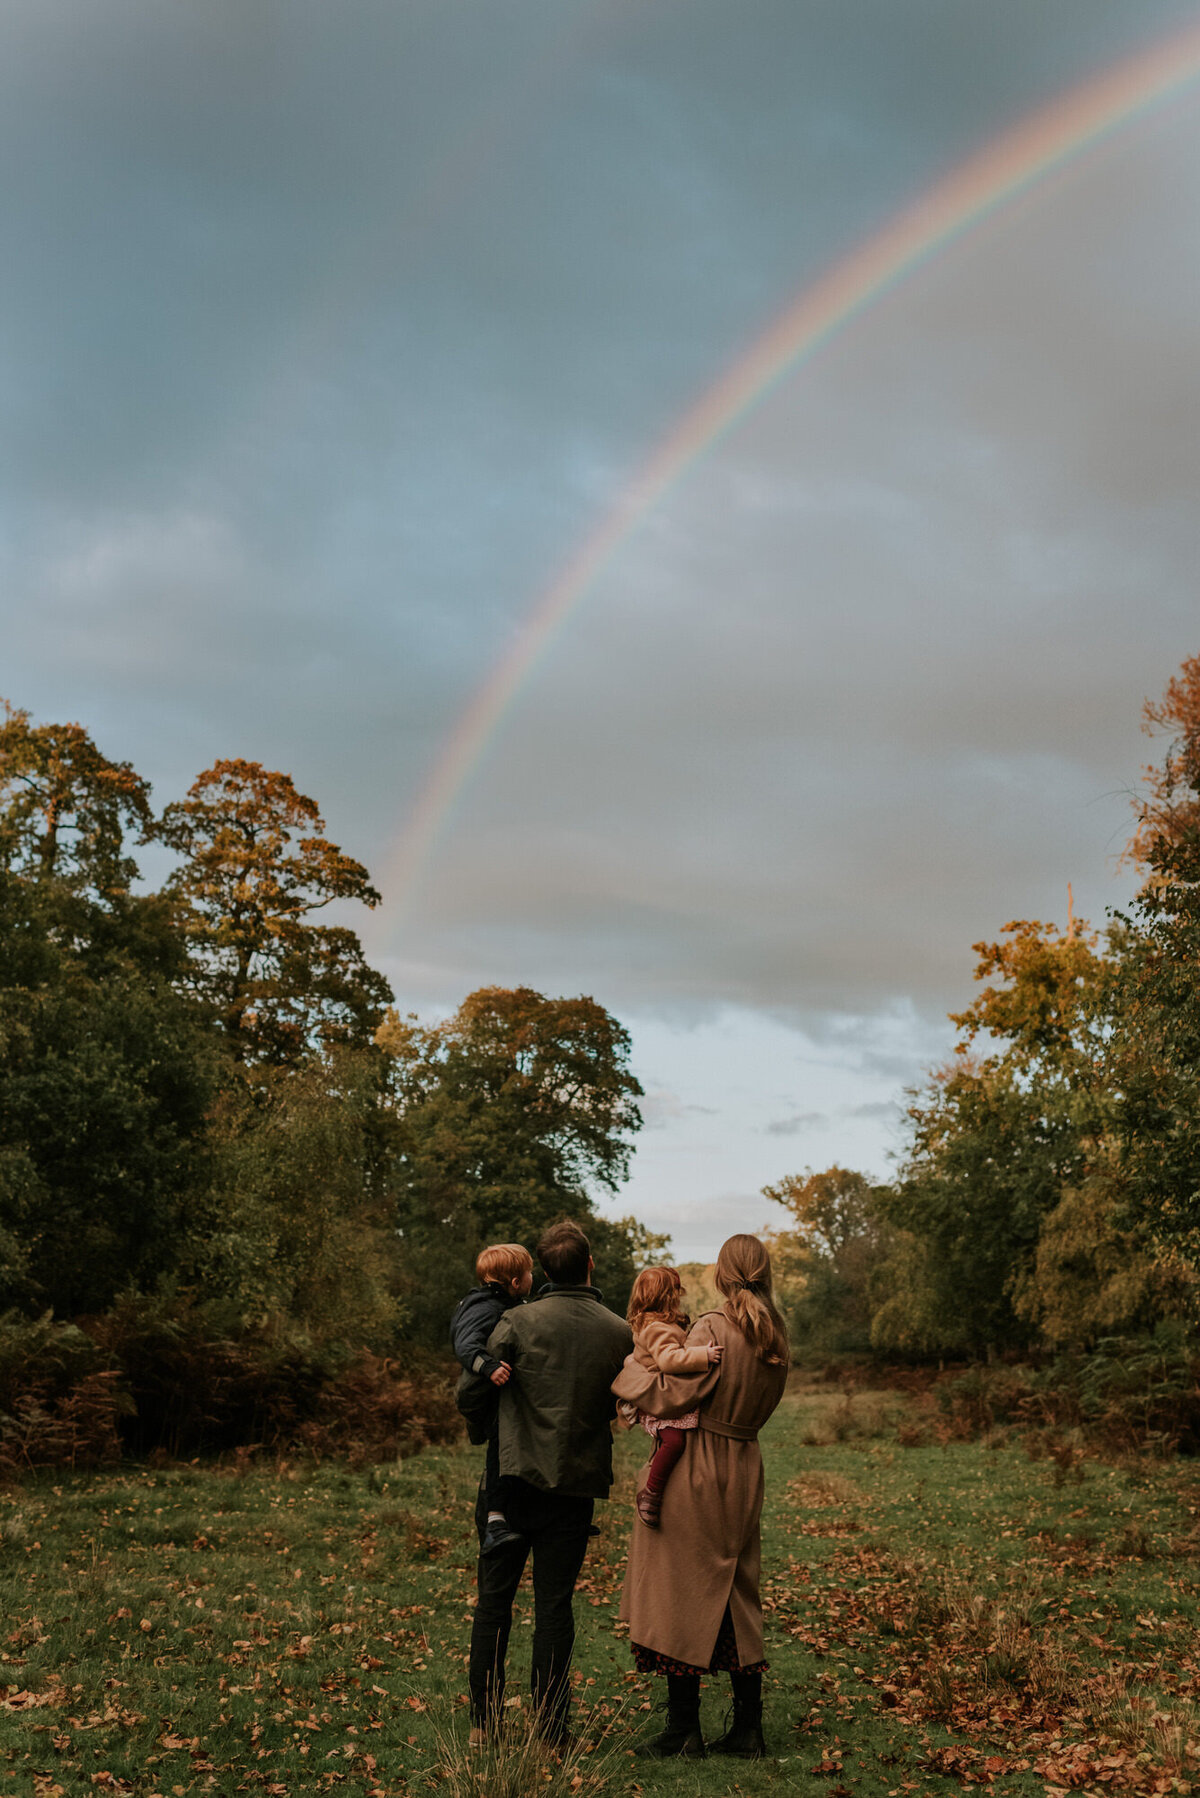 Family holding young children and watching rainbow